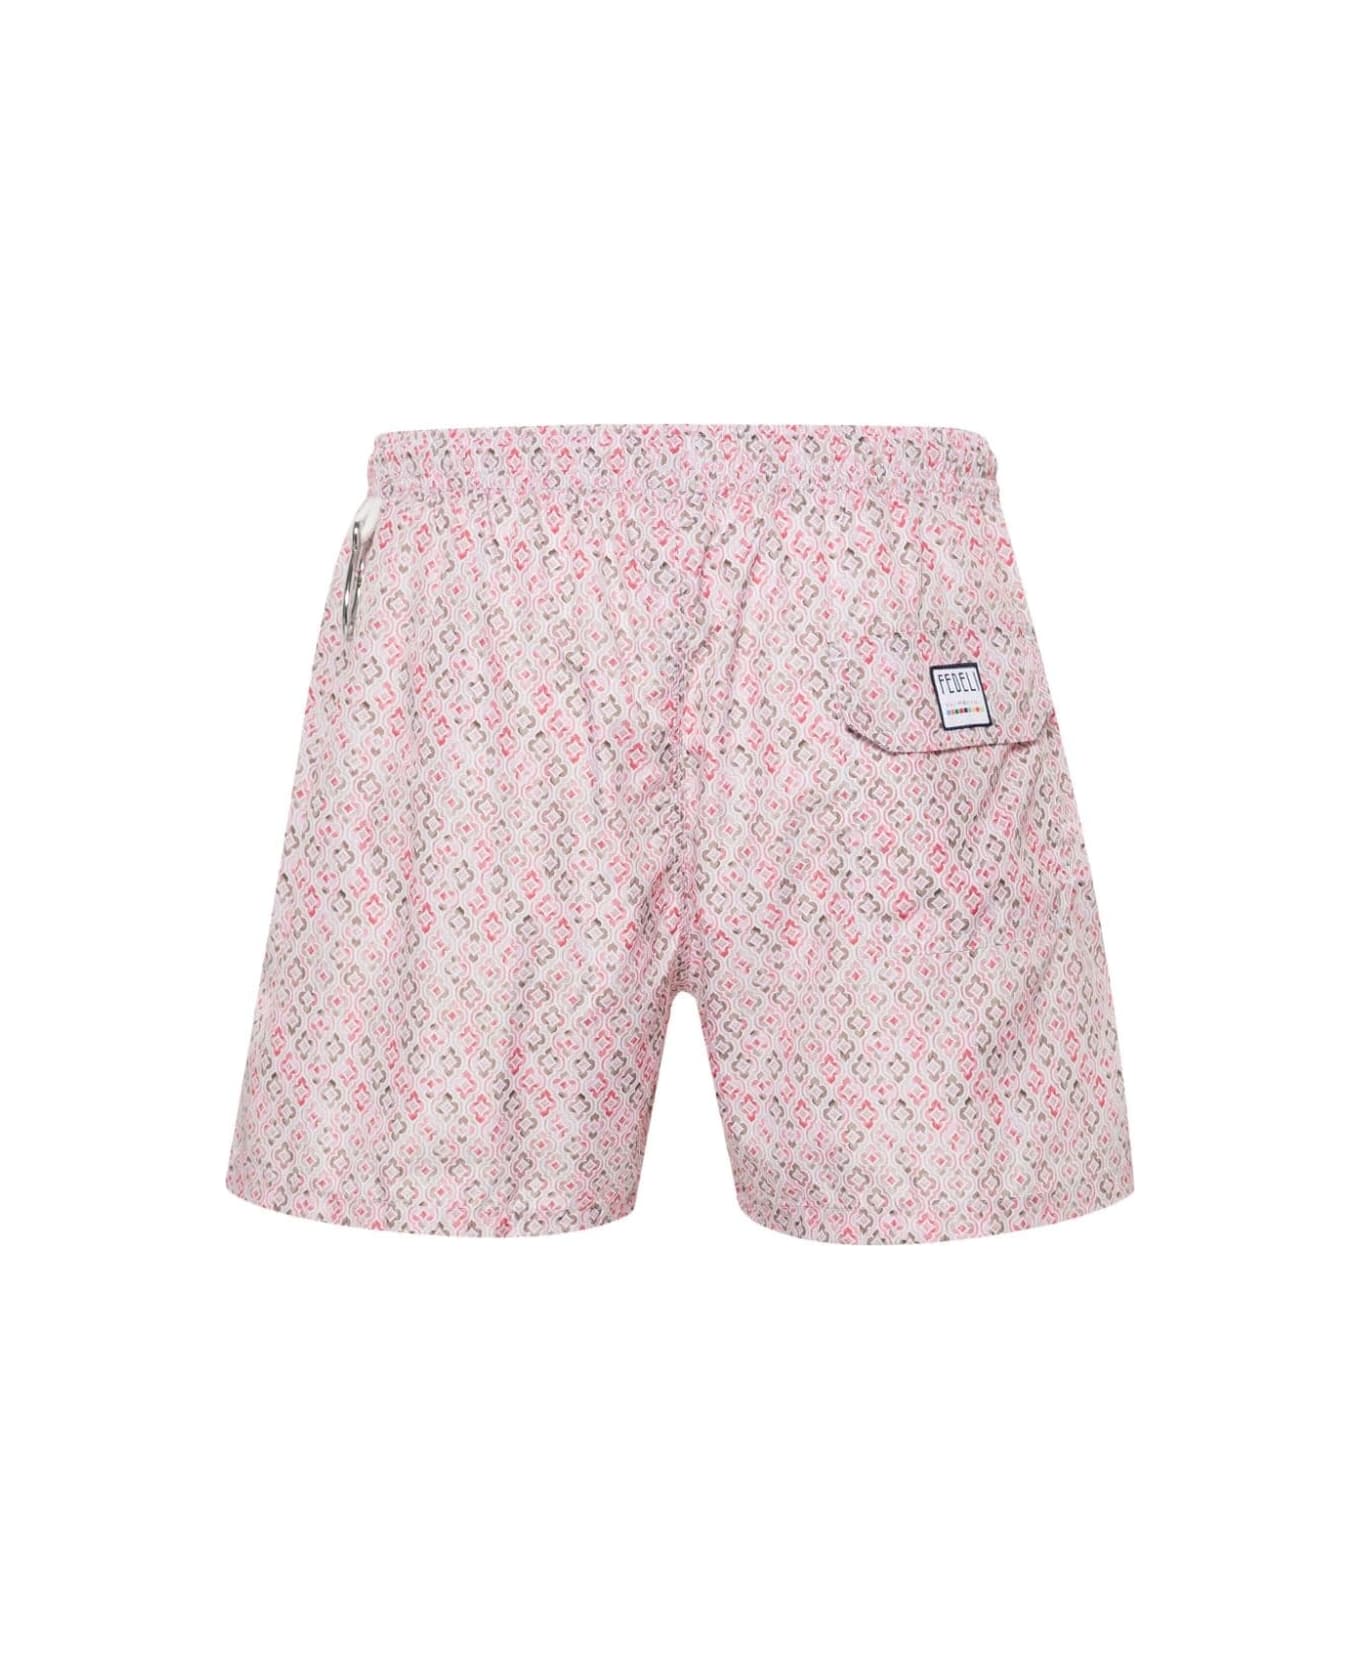 Fedeli Swim Shorts With Shaded Majolica Micro Pattern - Pink